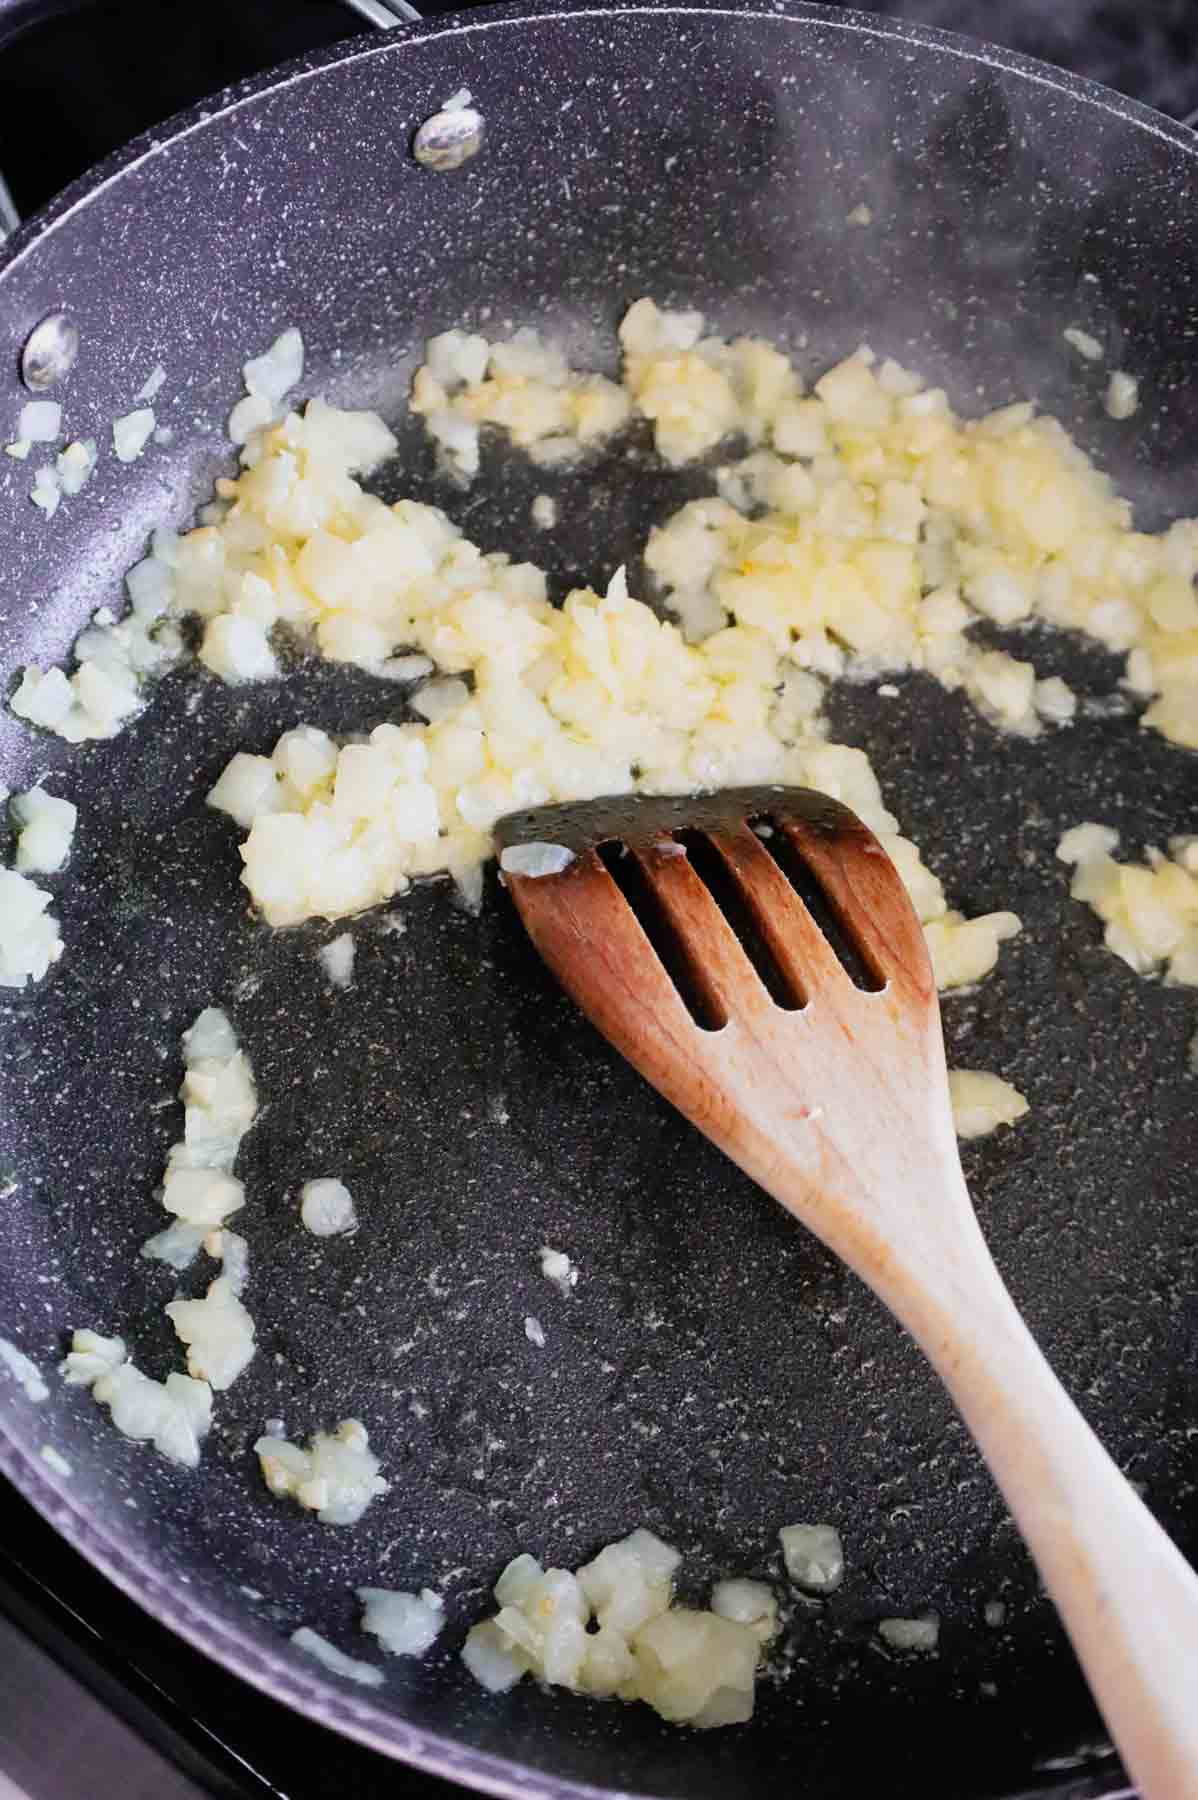 diced onions and garlic cooking in a skillet